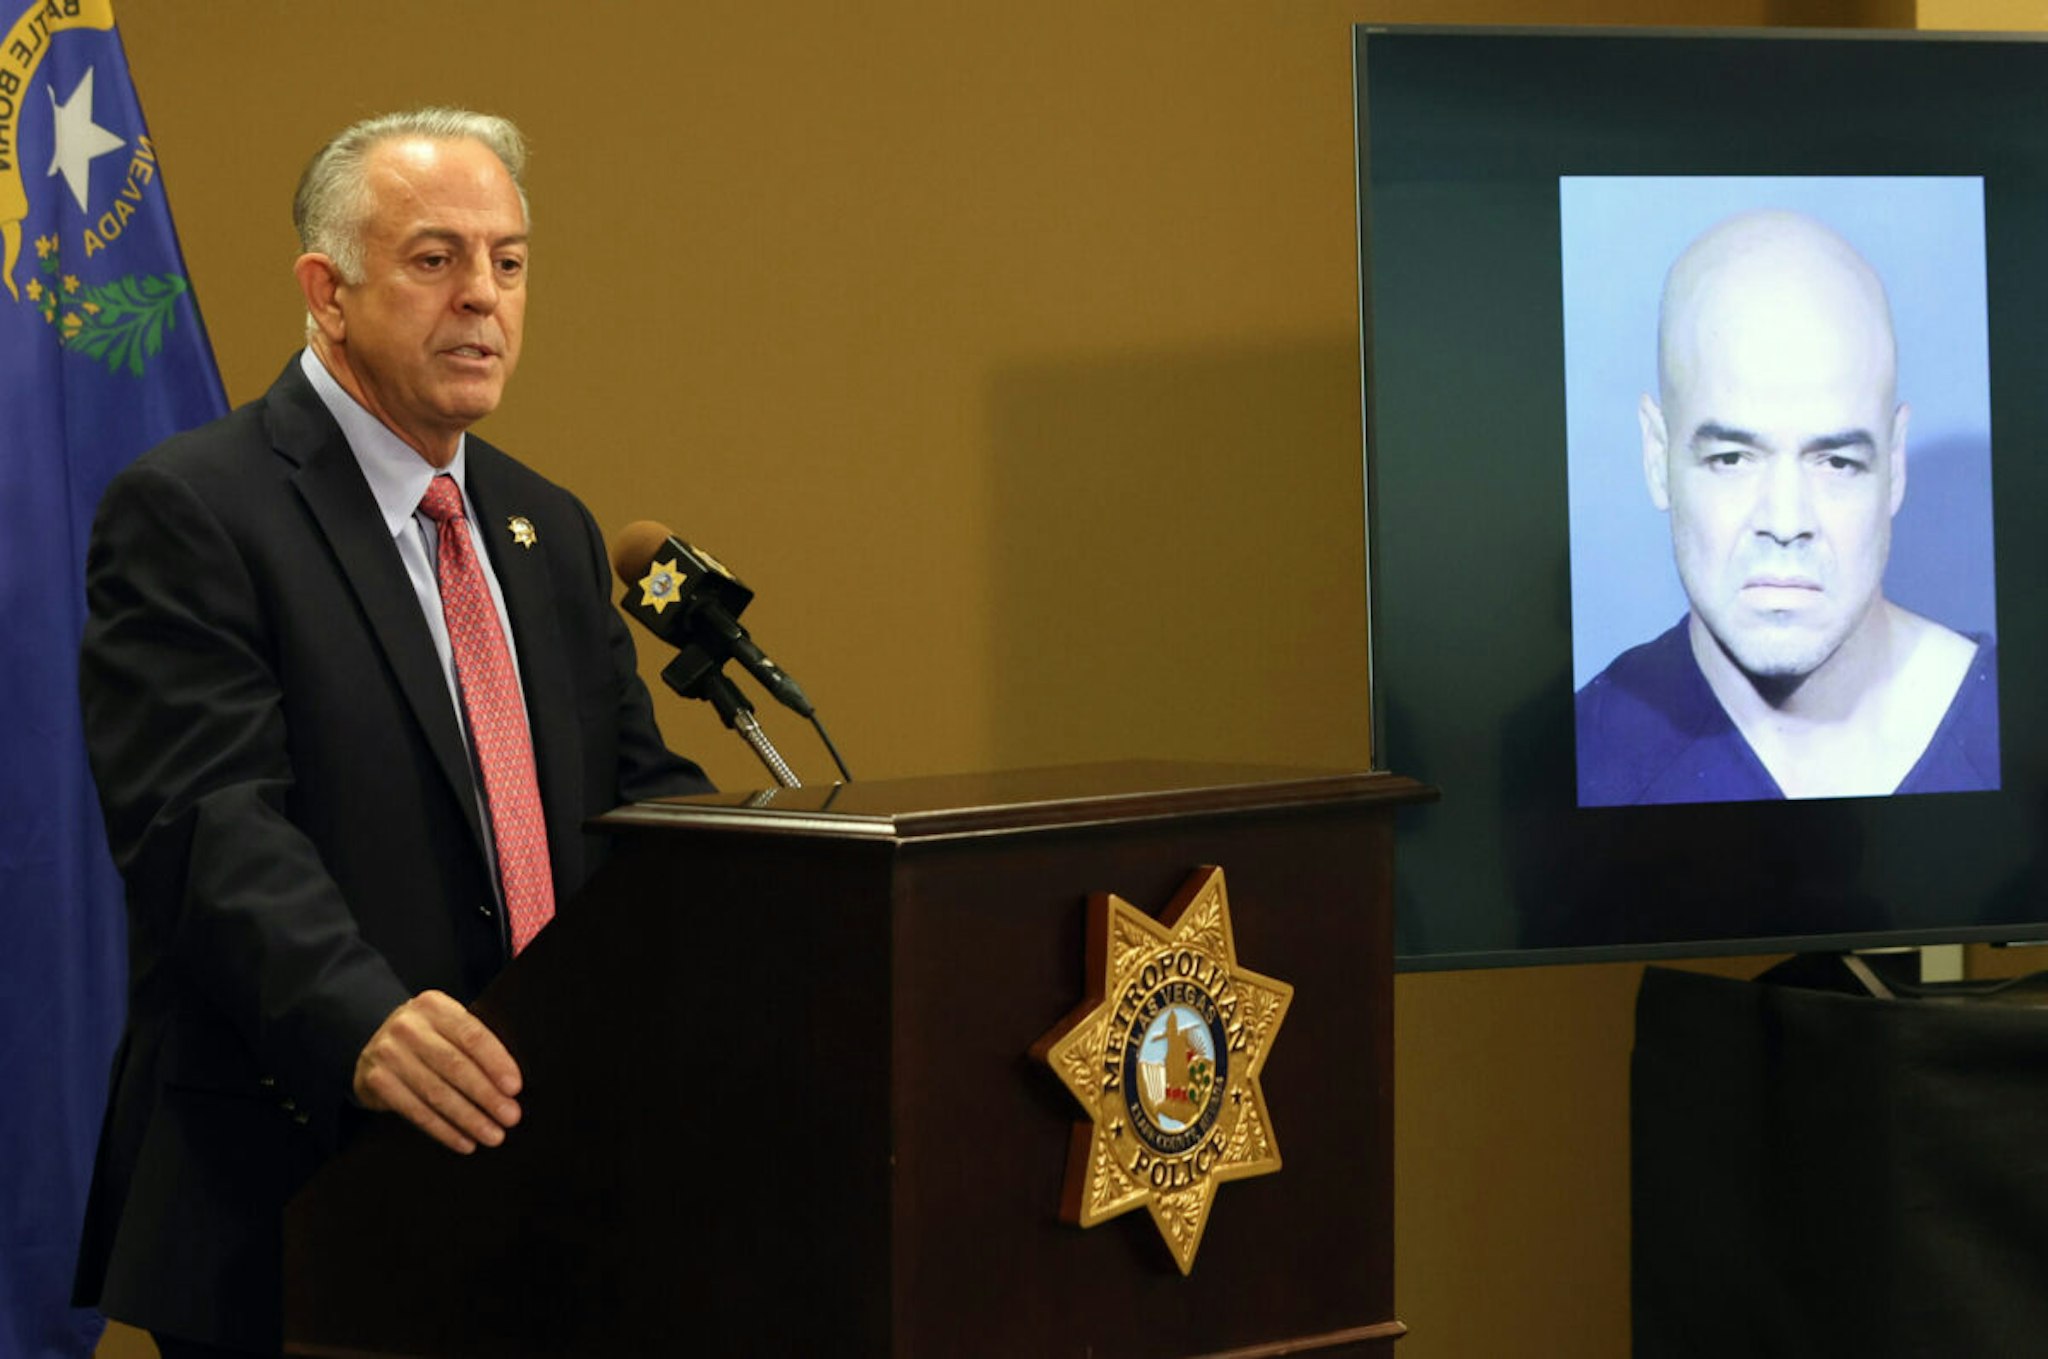 Clark County Sheriff Joe Lombardo speaks at a news conference at the Las Vegas Metropolitan Police Department headquarters to brief media members on the arrest of Clark County Public Administrator Robert Telles, whose booking photo is displayed on a television, on the charge of open murder of Las Vegas Review-Journal investigative reporter Jeff German on September 08, 2022, in Las Vegas, Nevada